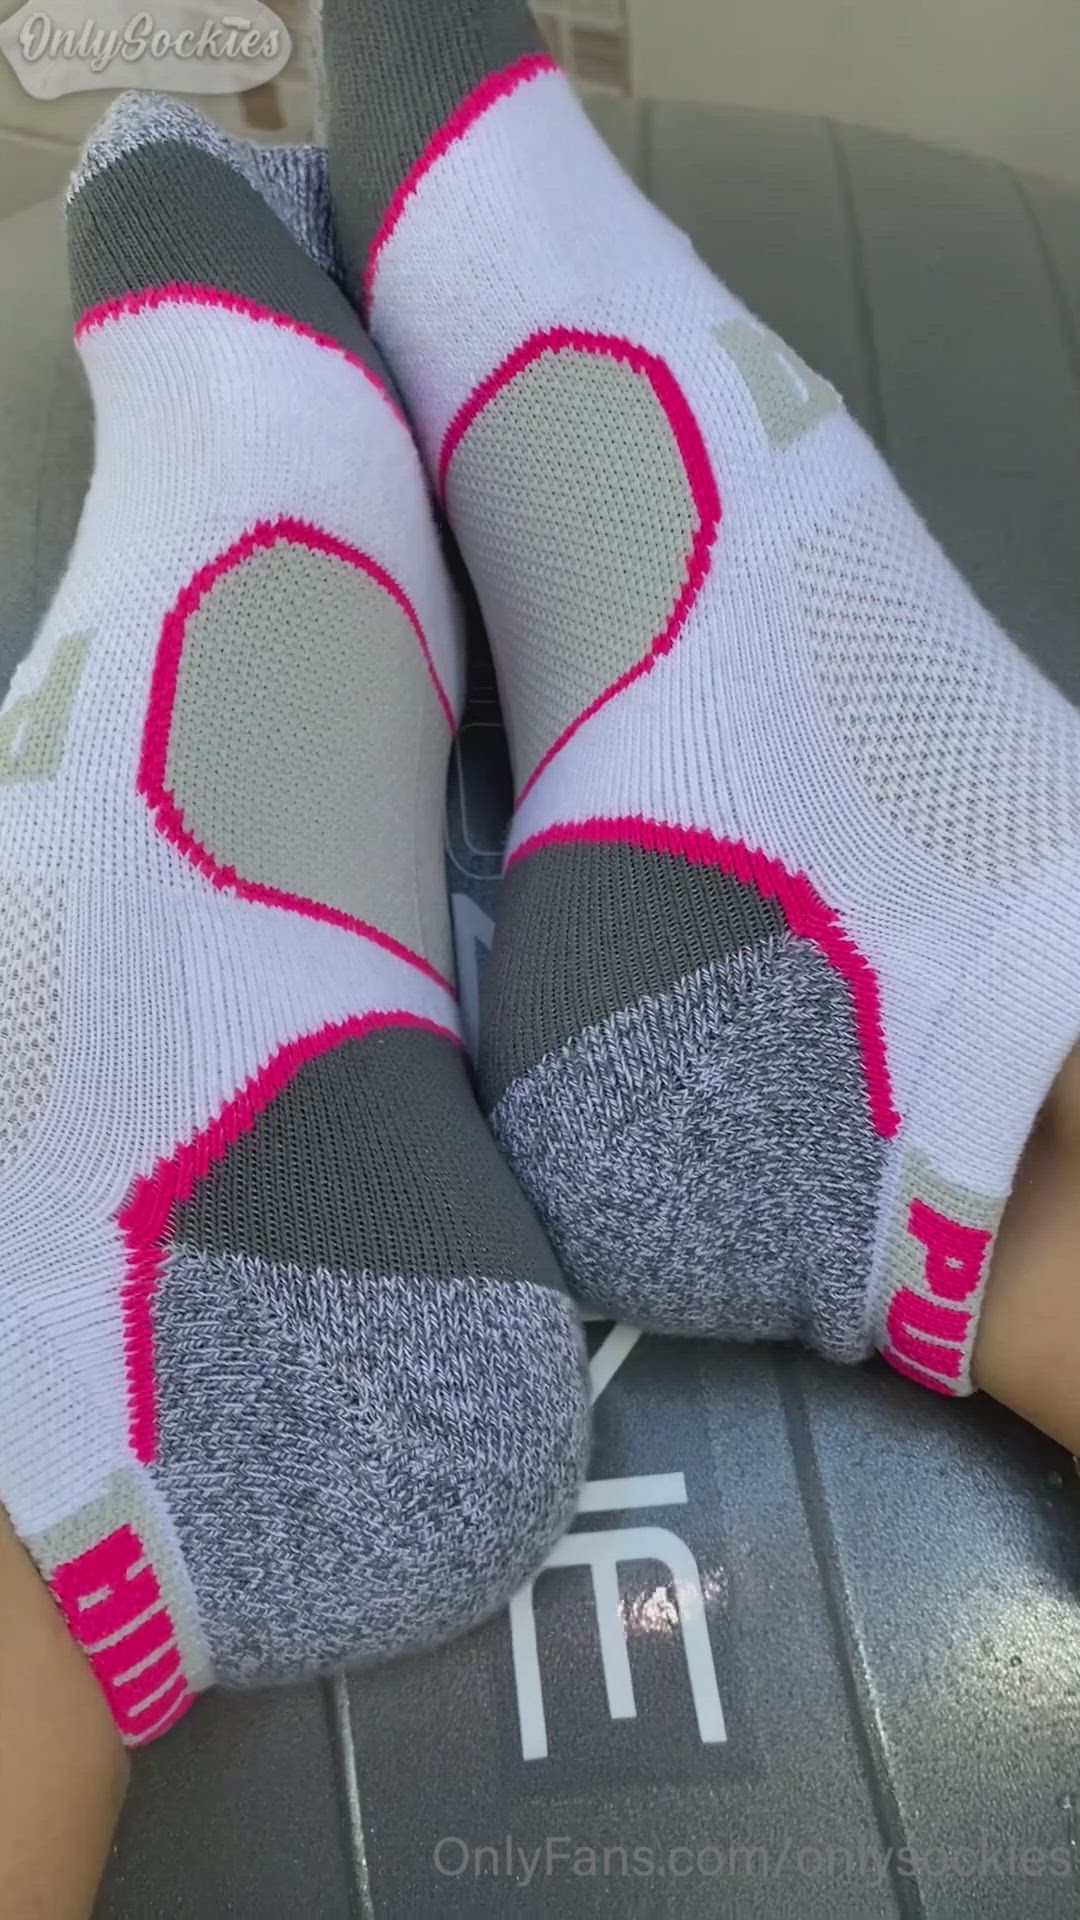 Feet porn video with onlyfans model onlysockies <strong>@onlysockies</strong>